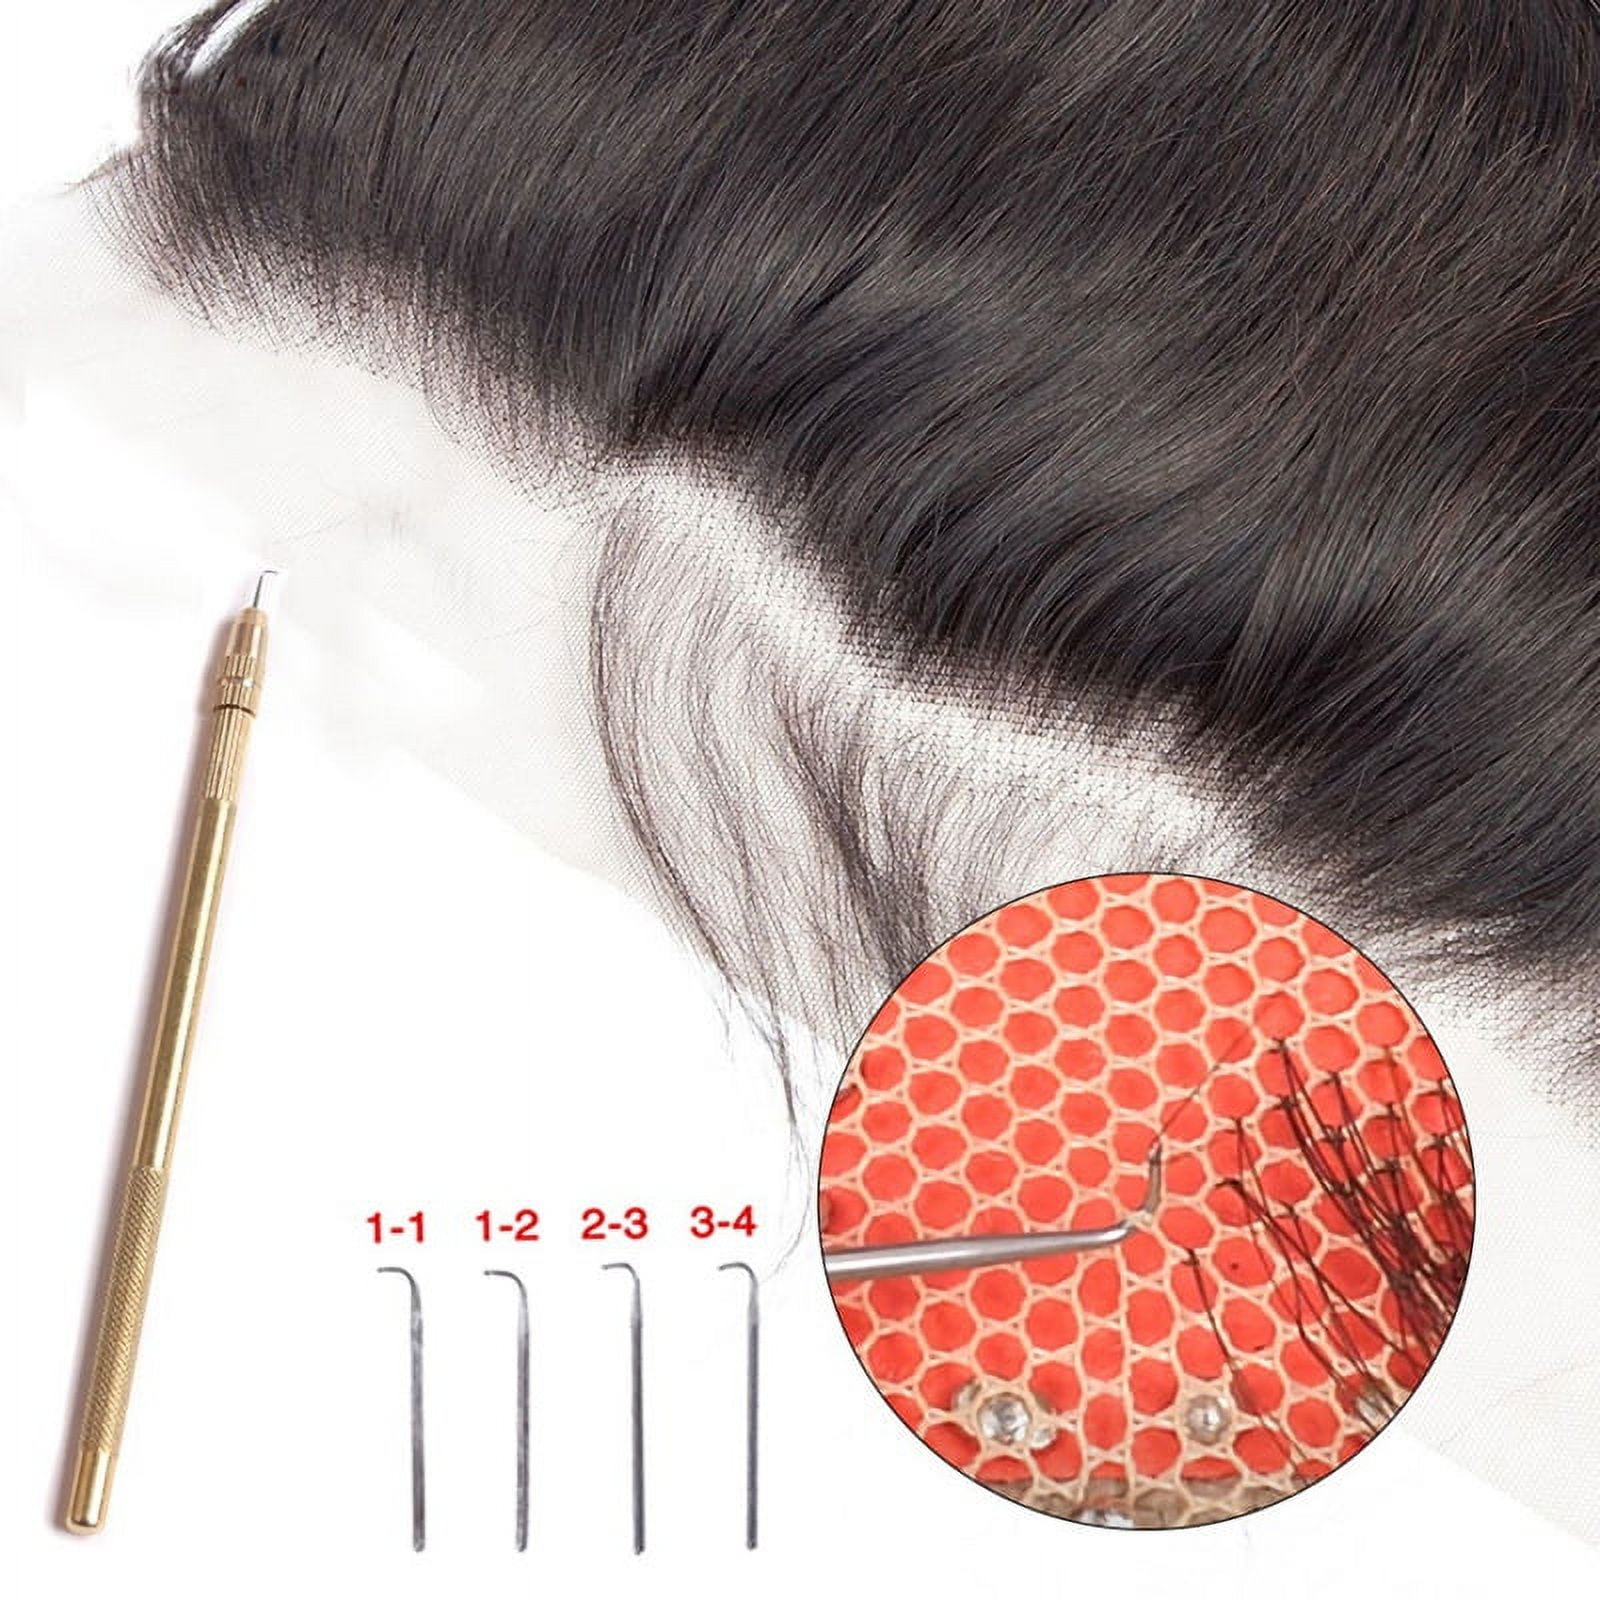 EXCEART 400 Pcs Wig T-pin Crochet Knitting Black People Wig Essentials Pin  for Sewing Mannequin Head Wig Pin Sewing Wig Straight Wig Starter Kit